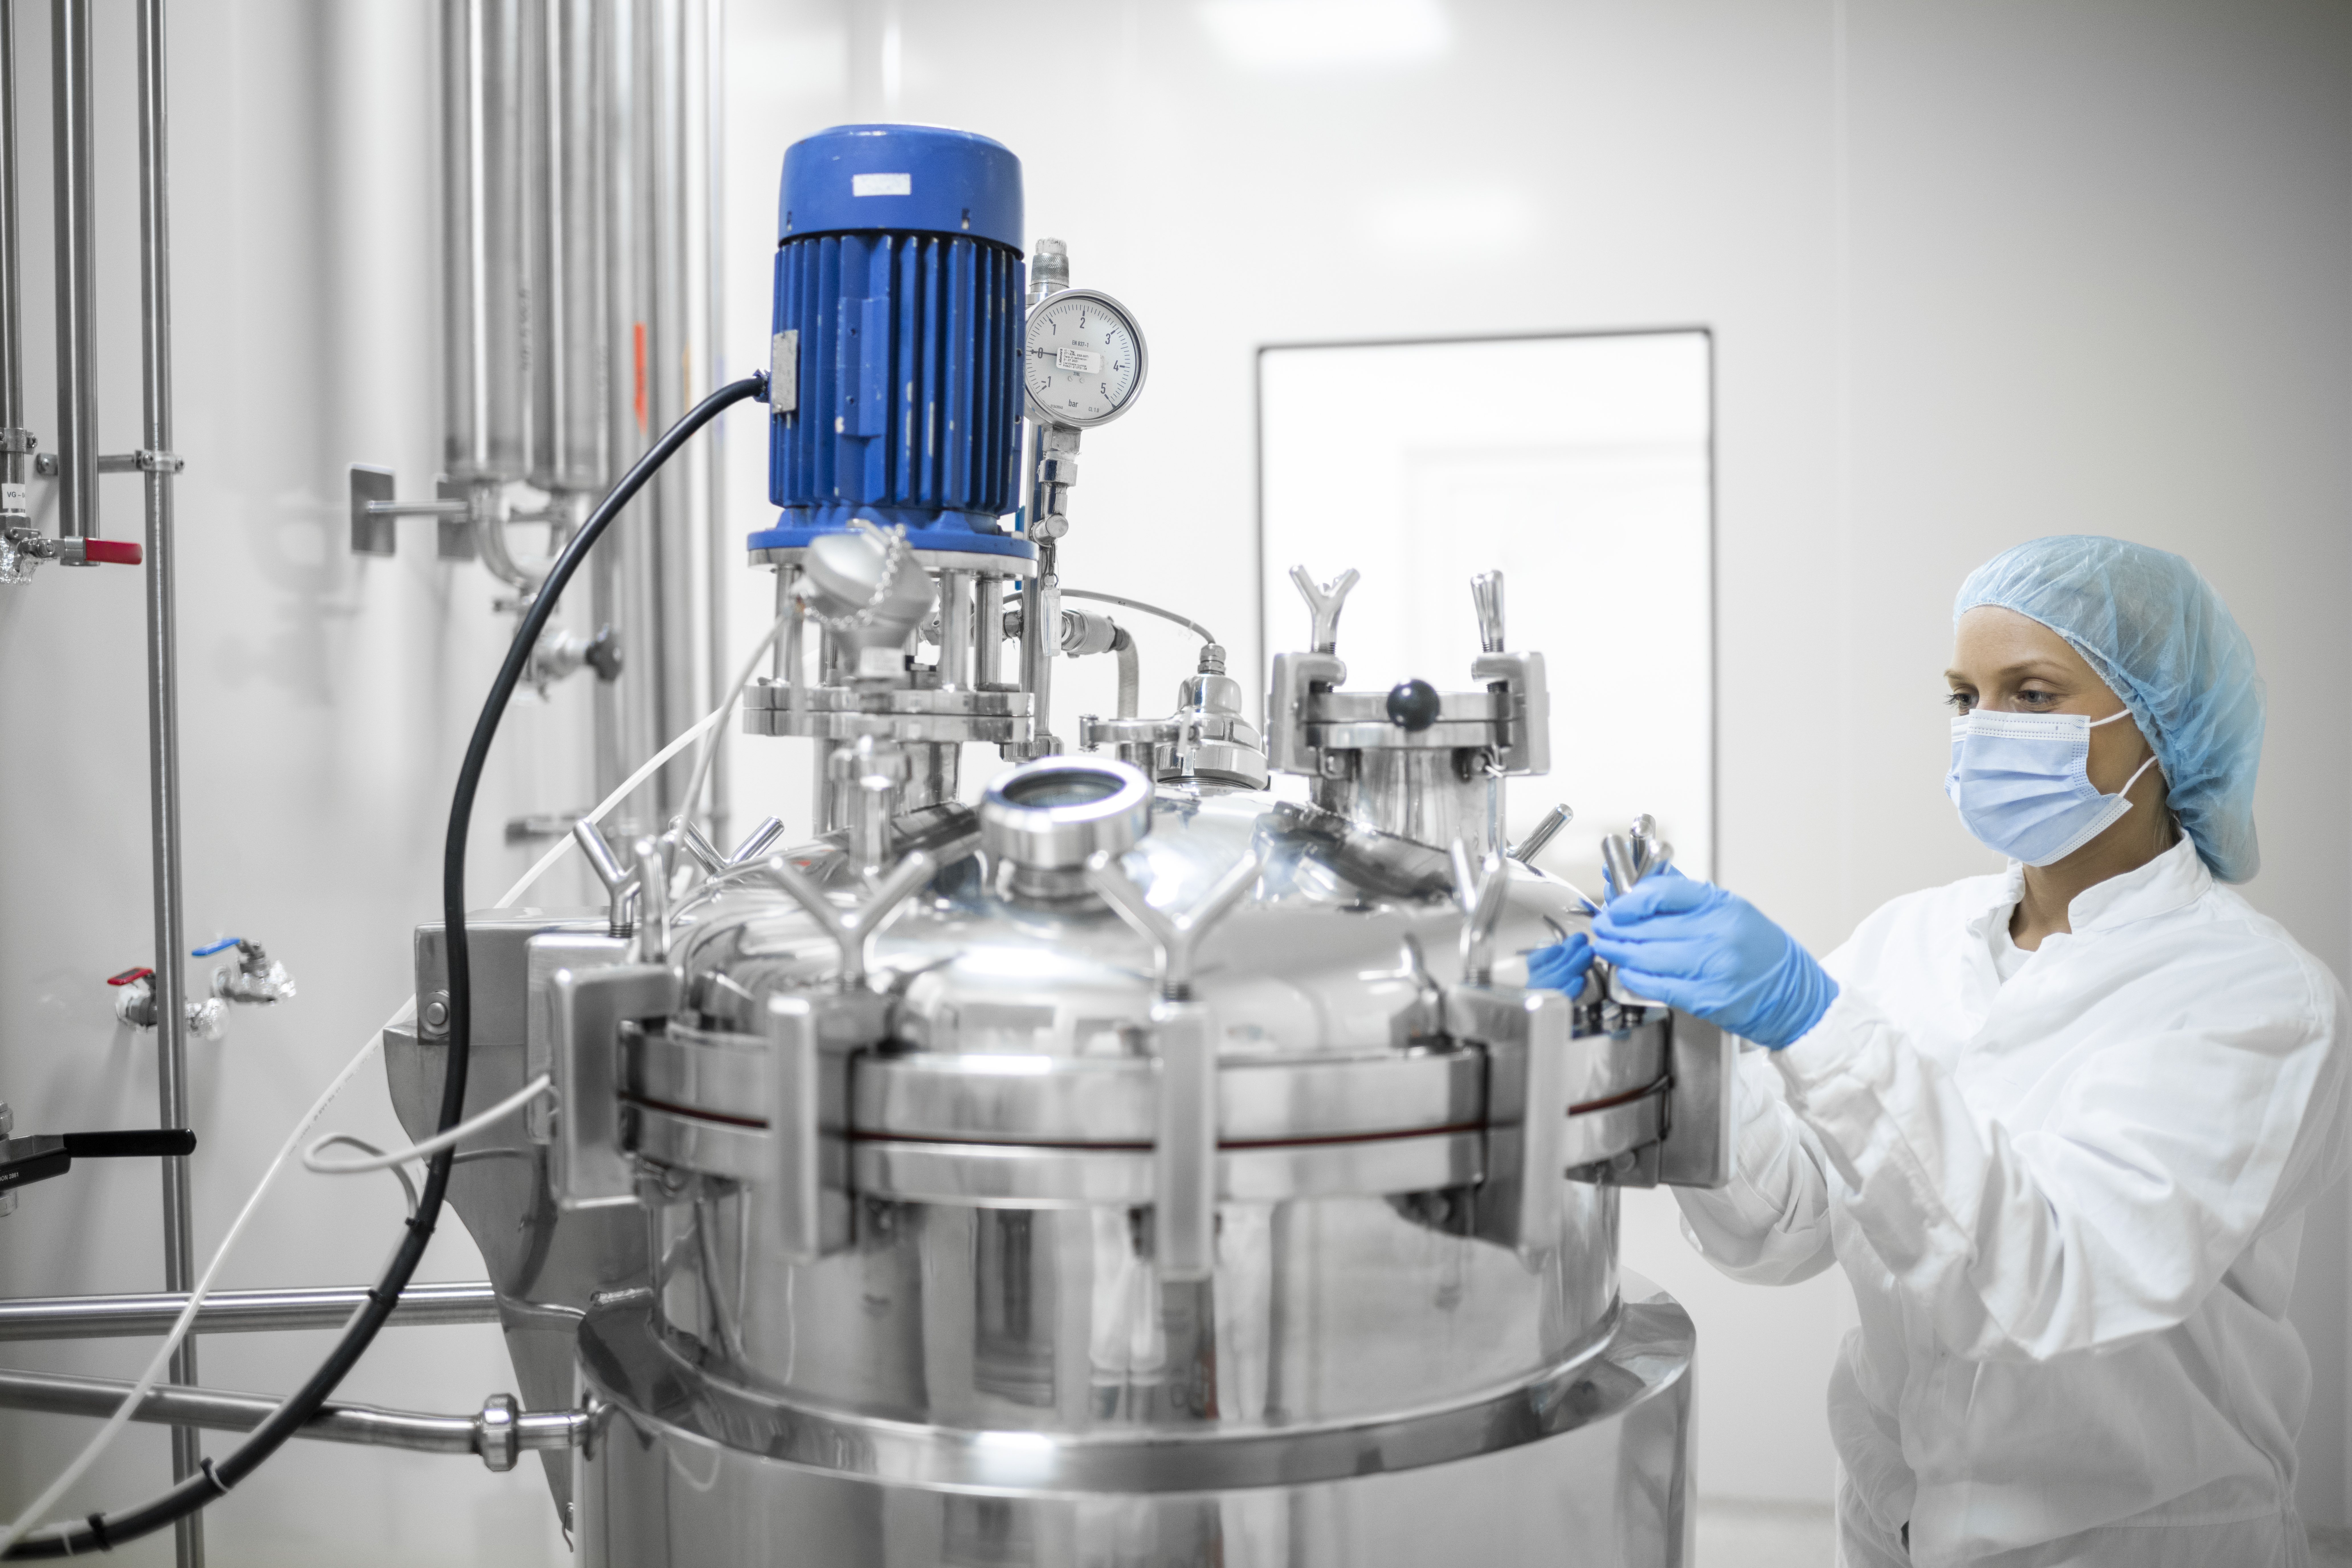 young female skilled worker in protective gear operates a high-tech equipment in a pharmaceutical production facility, ensuring the precise mixing of substances to